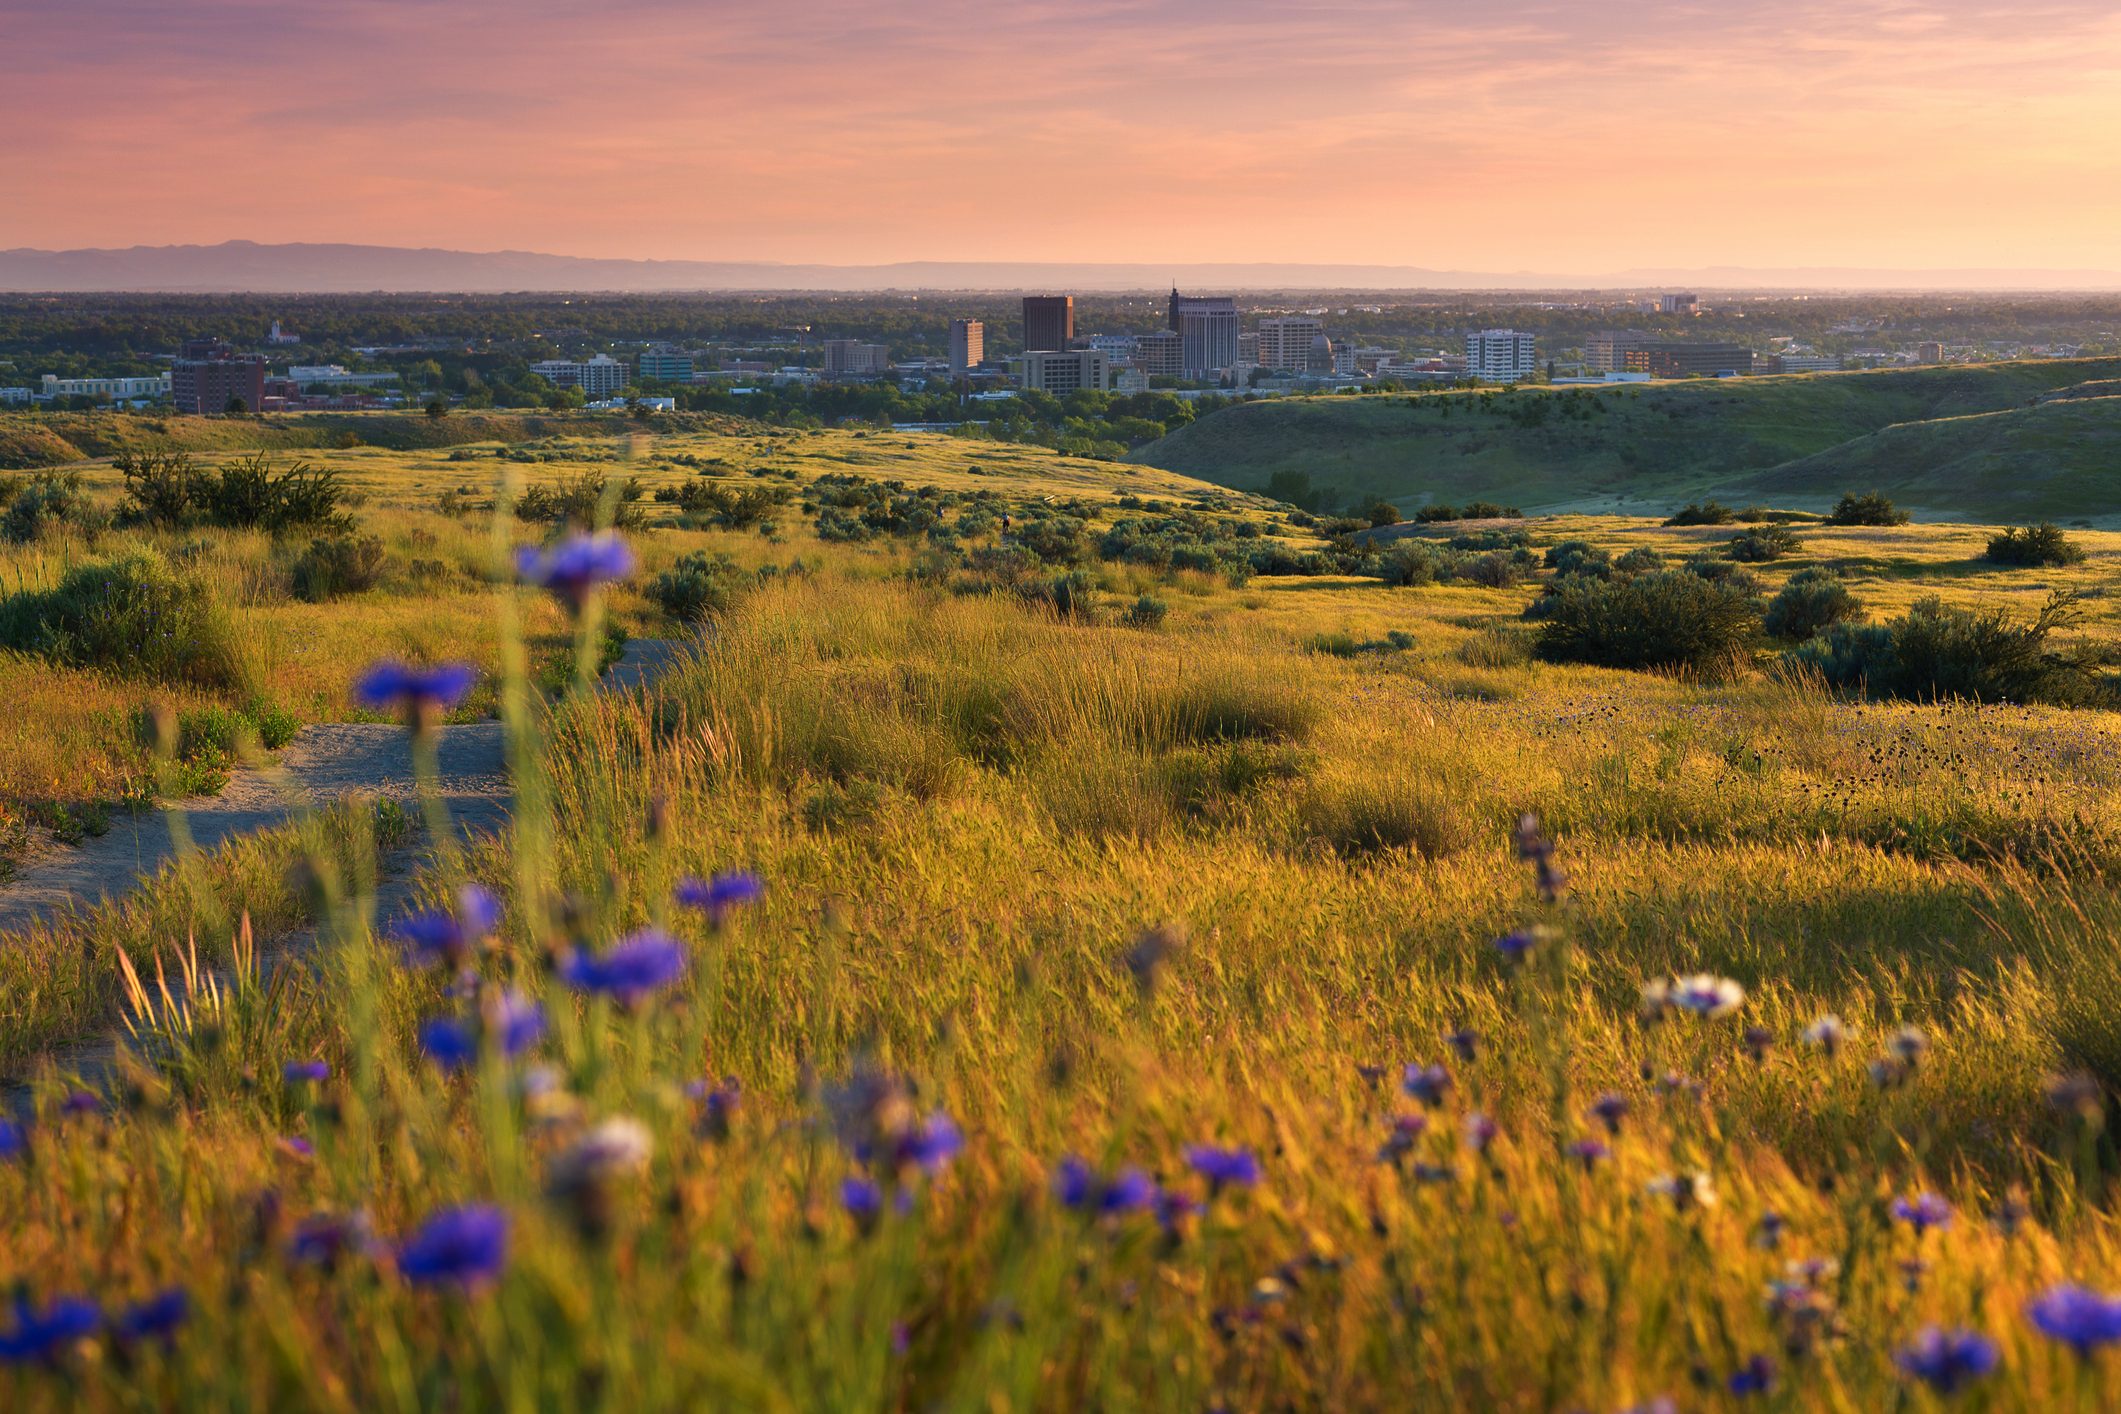 Boise Idaho valley from surrounding foothills in spring framed by wildflowers, sunset view